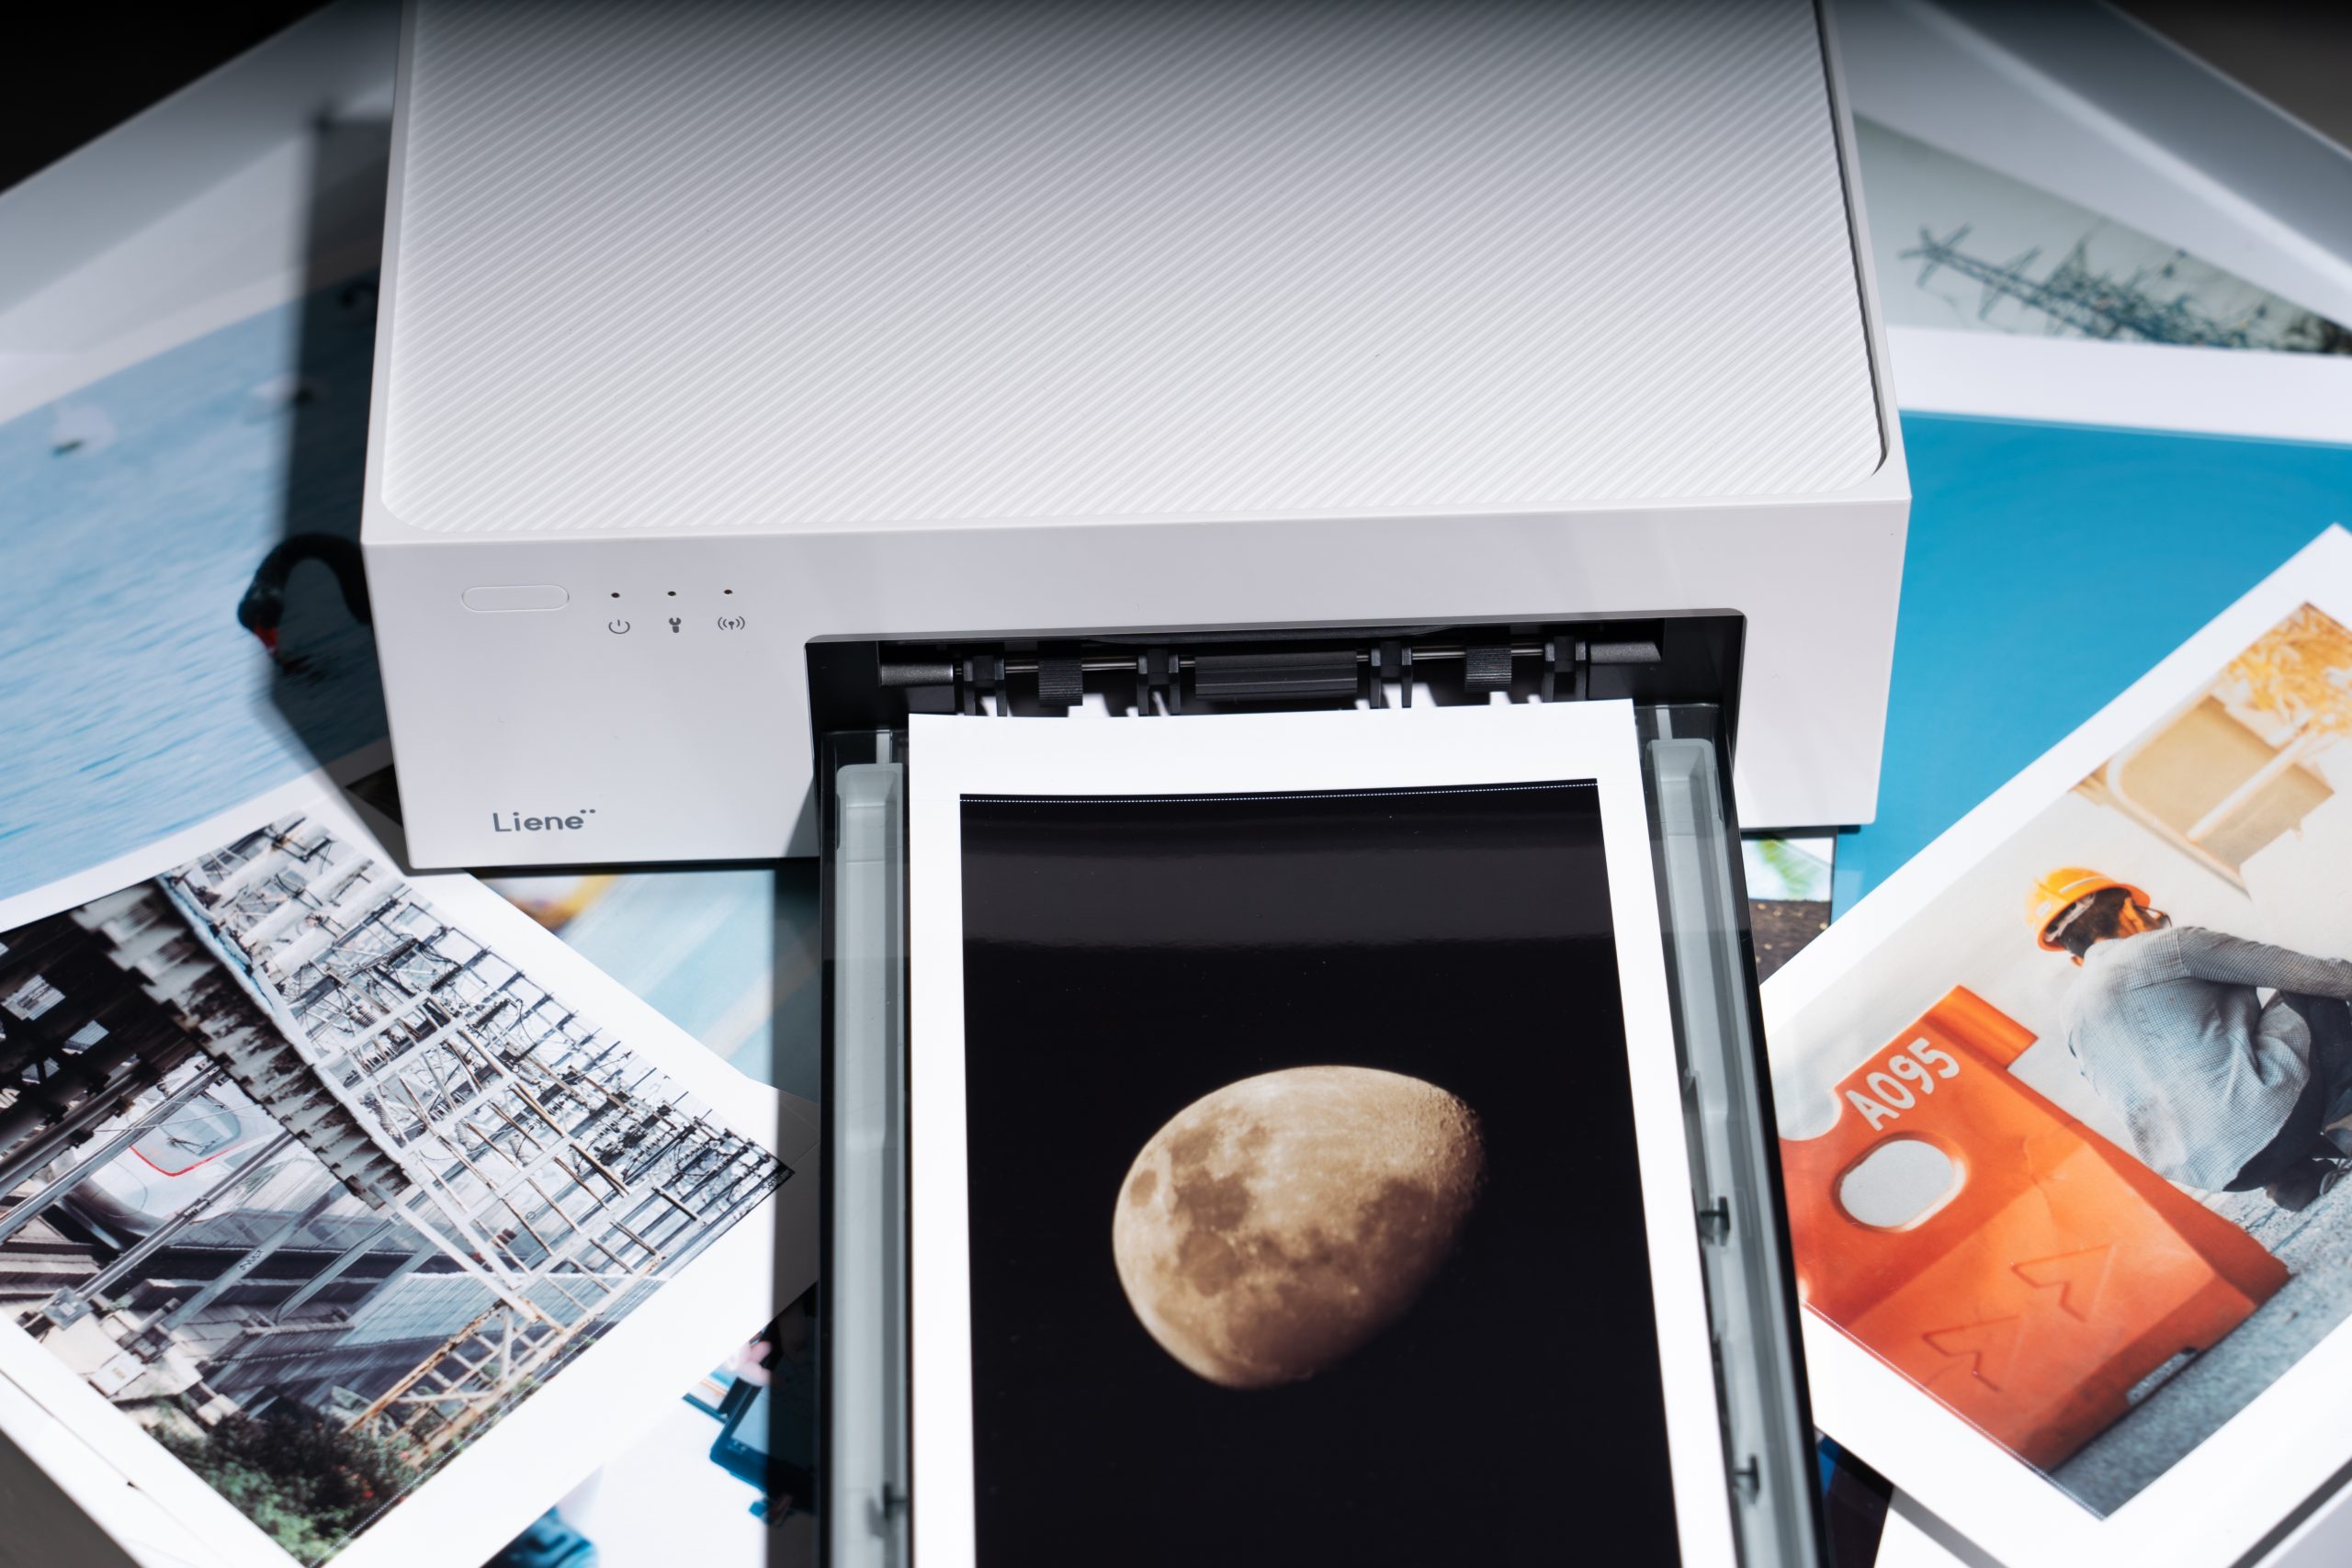 How Can I Keep My Instant Photo Printer Operating At Peak Quality?